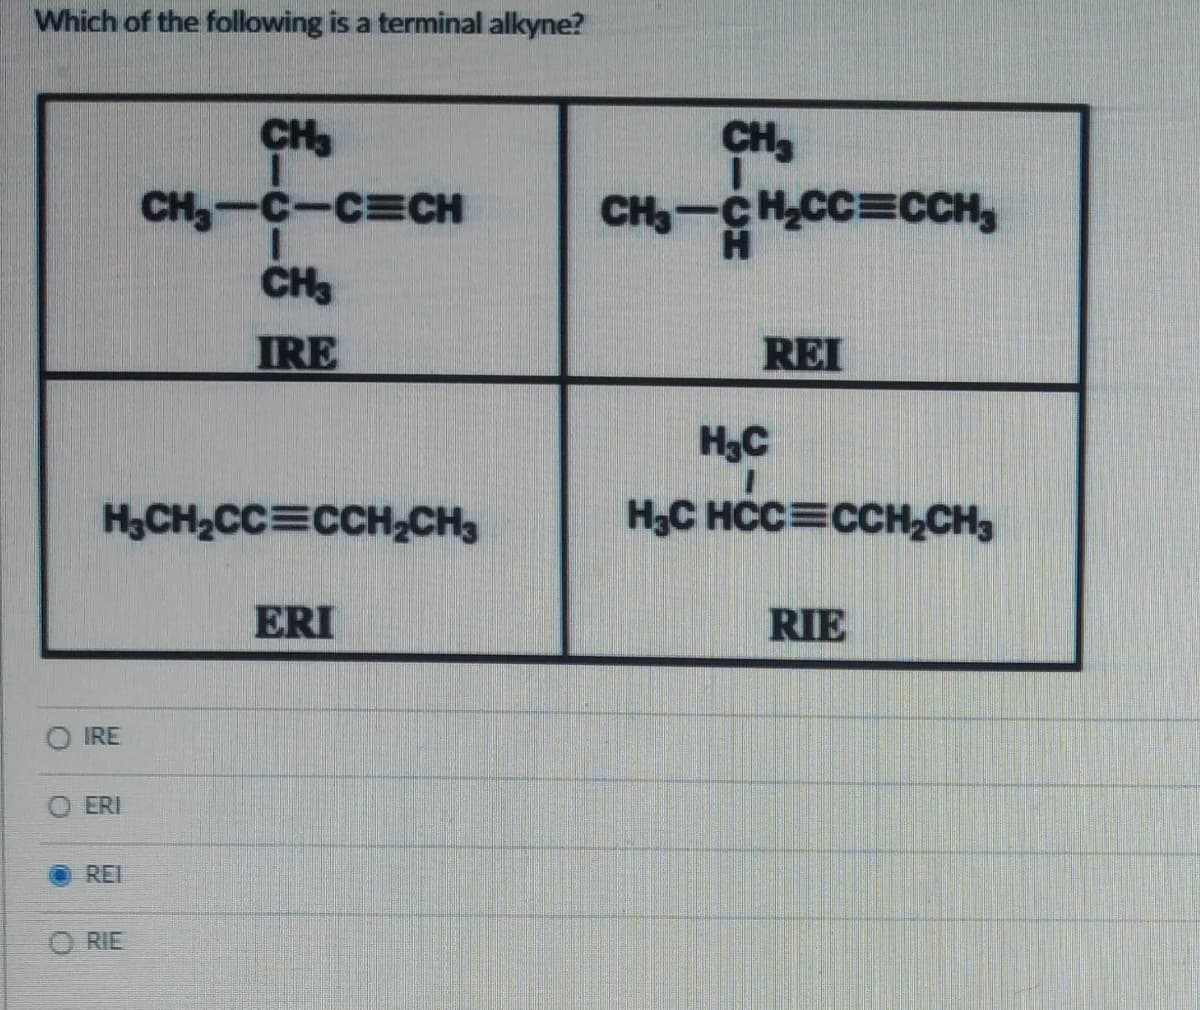 Which of the following is a terminal alkyne?
H₂CH₂CC=CCH₂CH3
IRE
ERI
REI
CH3
CH₂-C-C=CH
I
CH3
IRE
ORIE
ERI
CH₂
CH₂-CH₂CC=CCH
REI
H₂C
H₂C HCC=CCH₂CH3
RIE